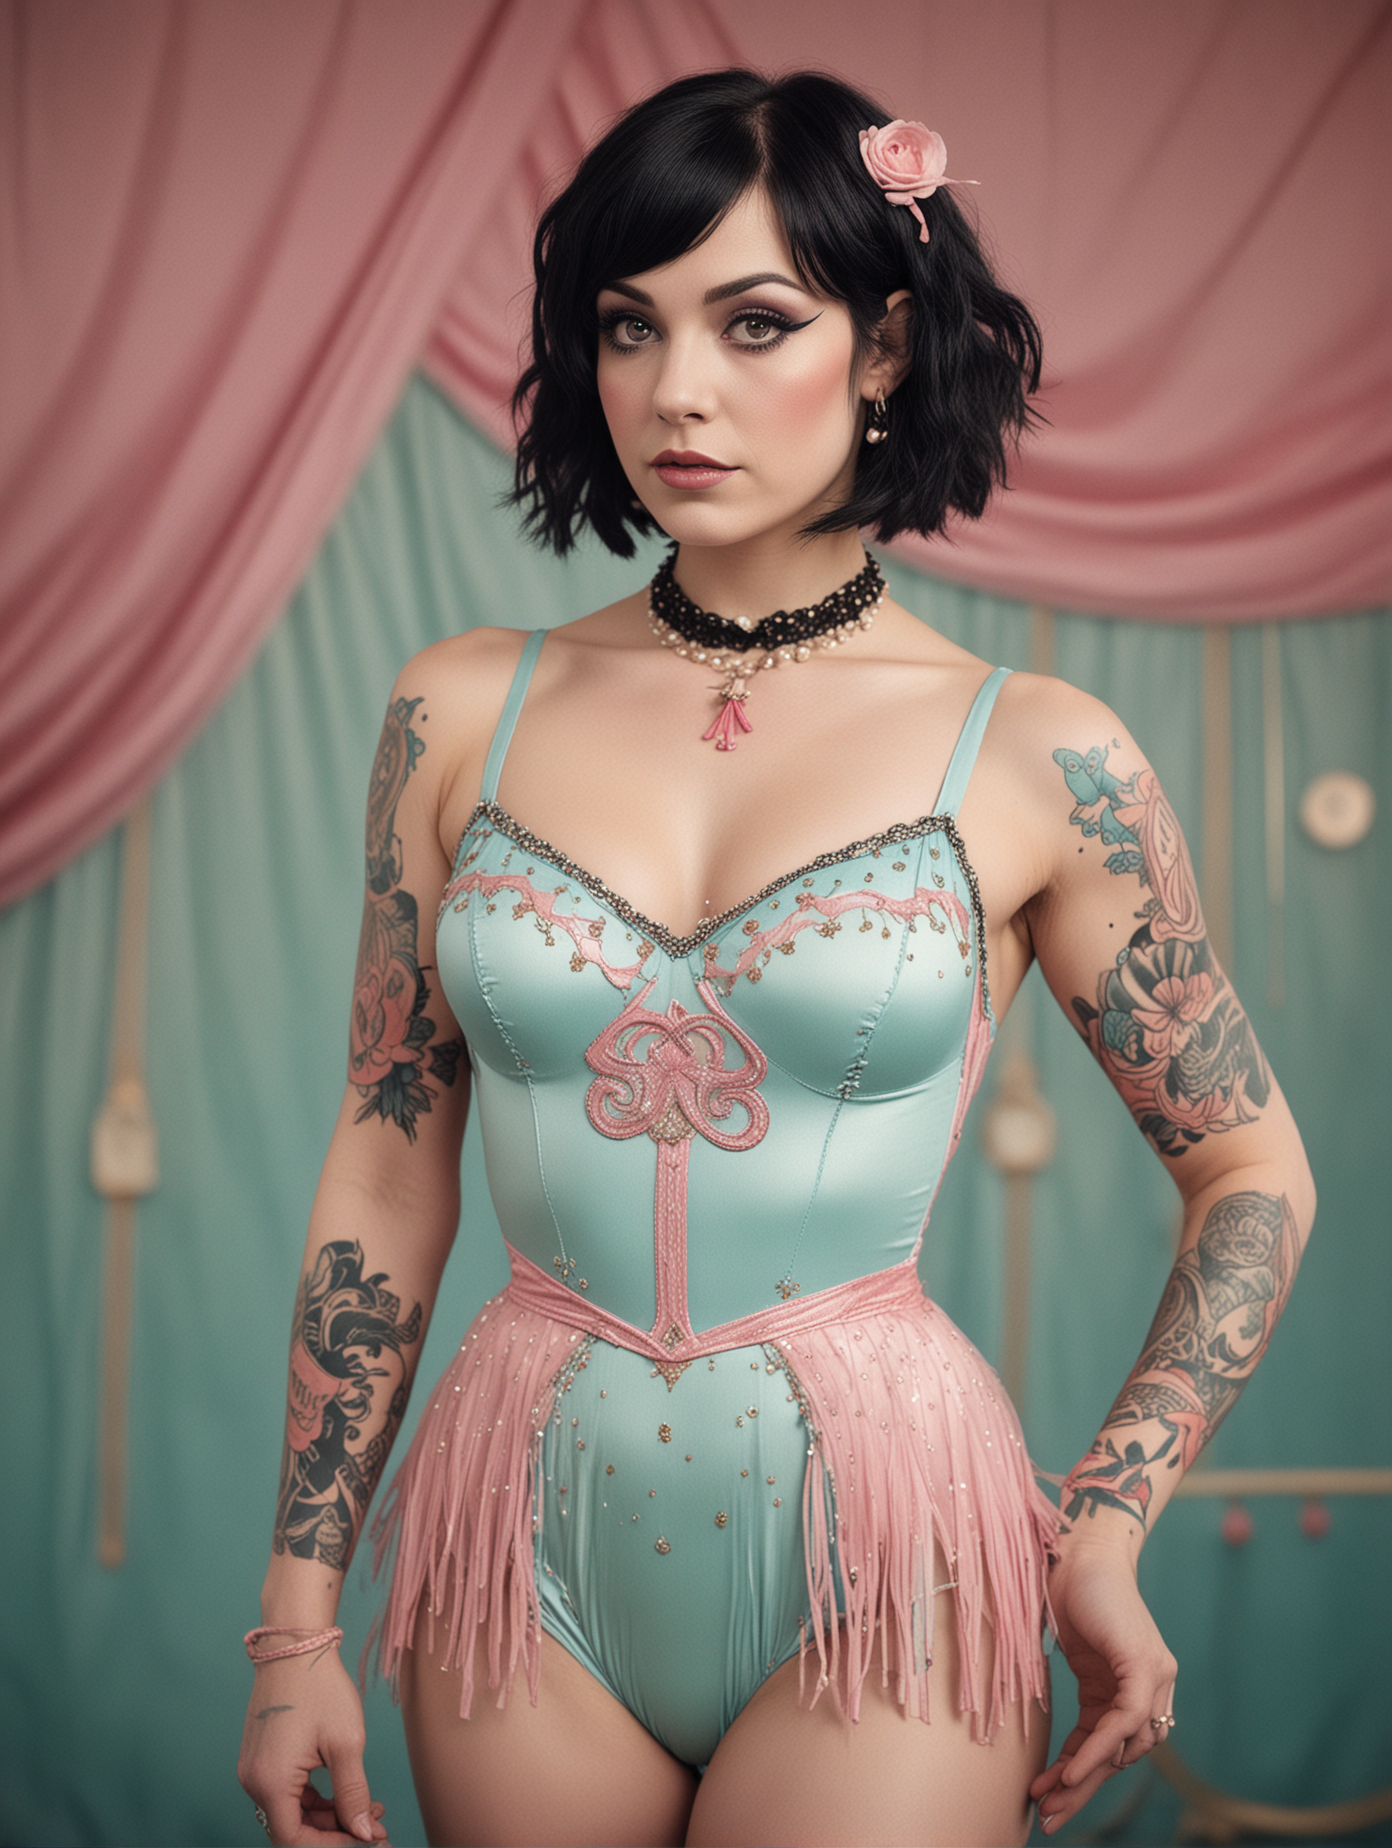 circus, in the style of whimsical yet eerie symbolism, American 1920's circus, light cyan and pink palette, close up portraiture, well built busty female acrobat with black hair, wearing a leotard and tutu, covered in tatoos, nature-inspired pieces, circus costumes, ultra details